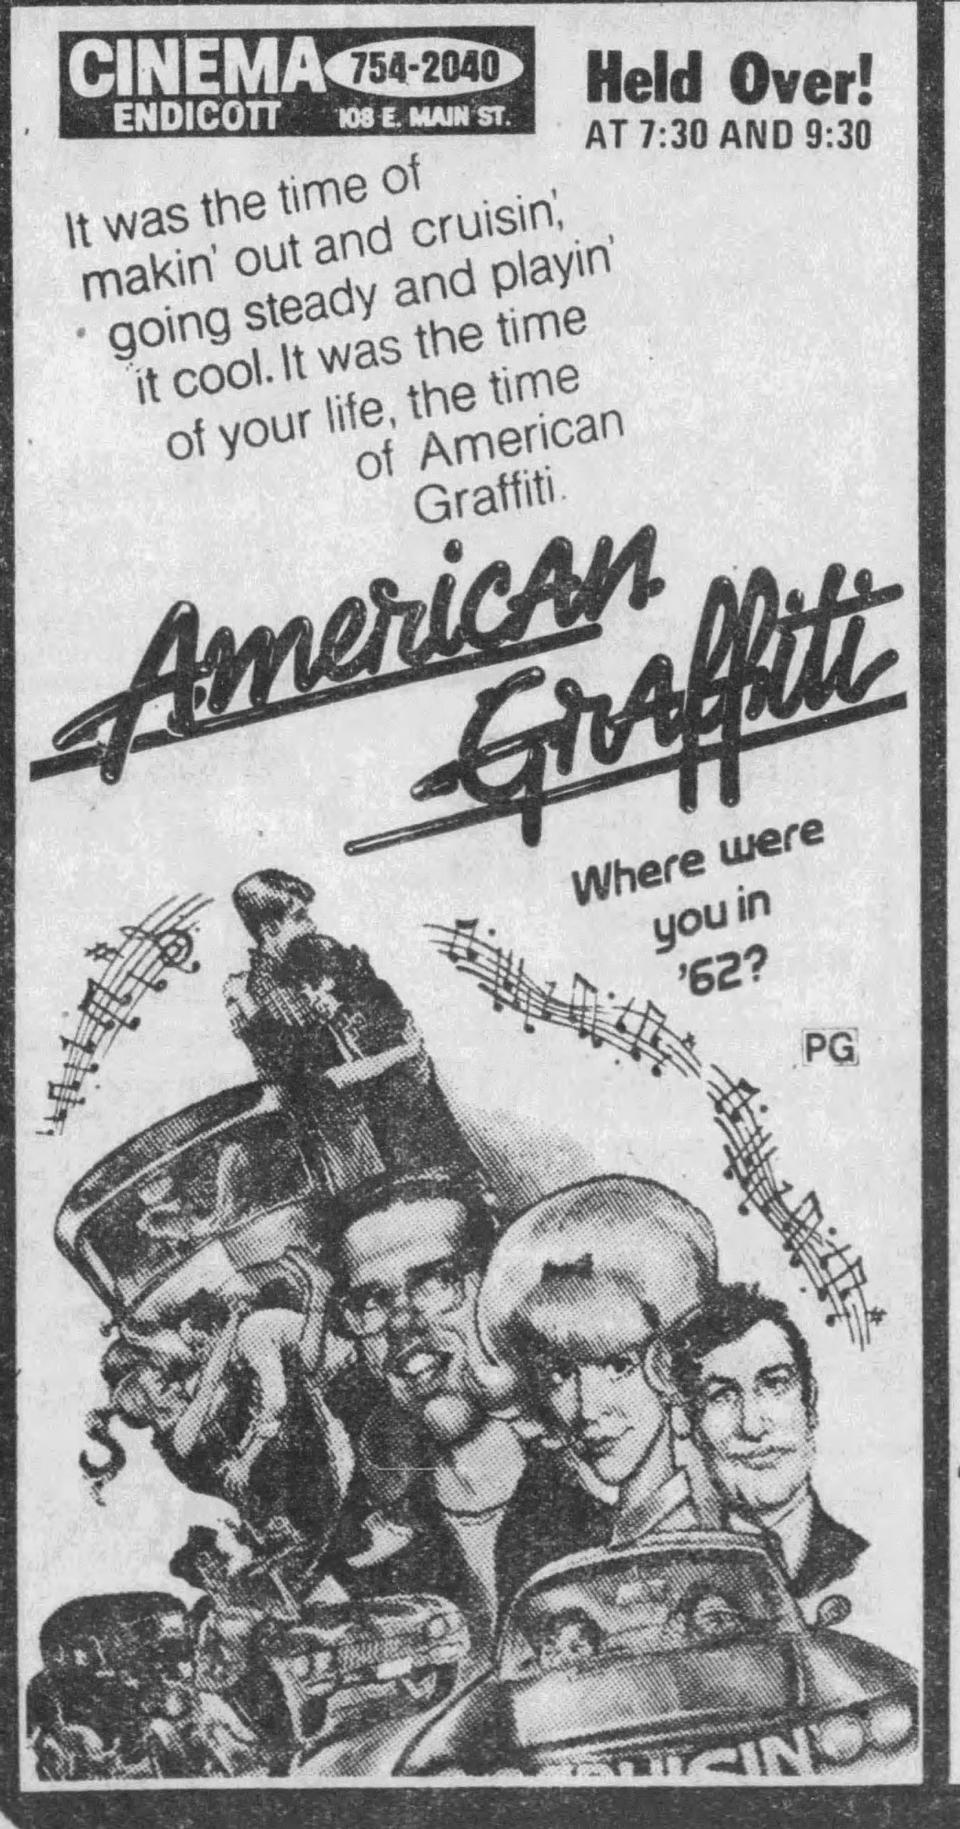 One movie shown Thanksgiving 1973 was "American Graffiti," which became a big hit.